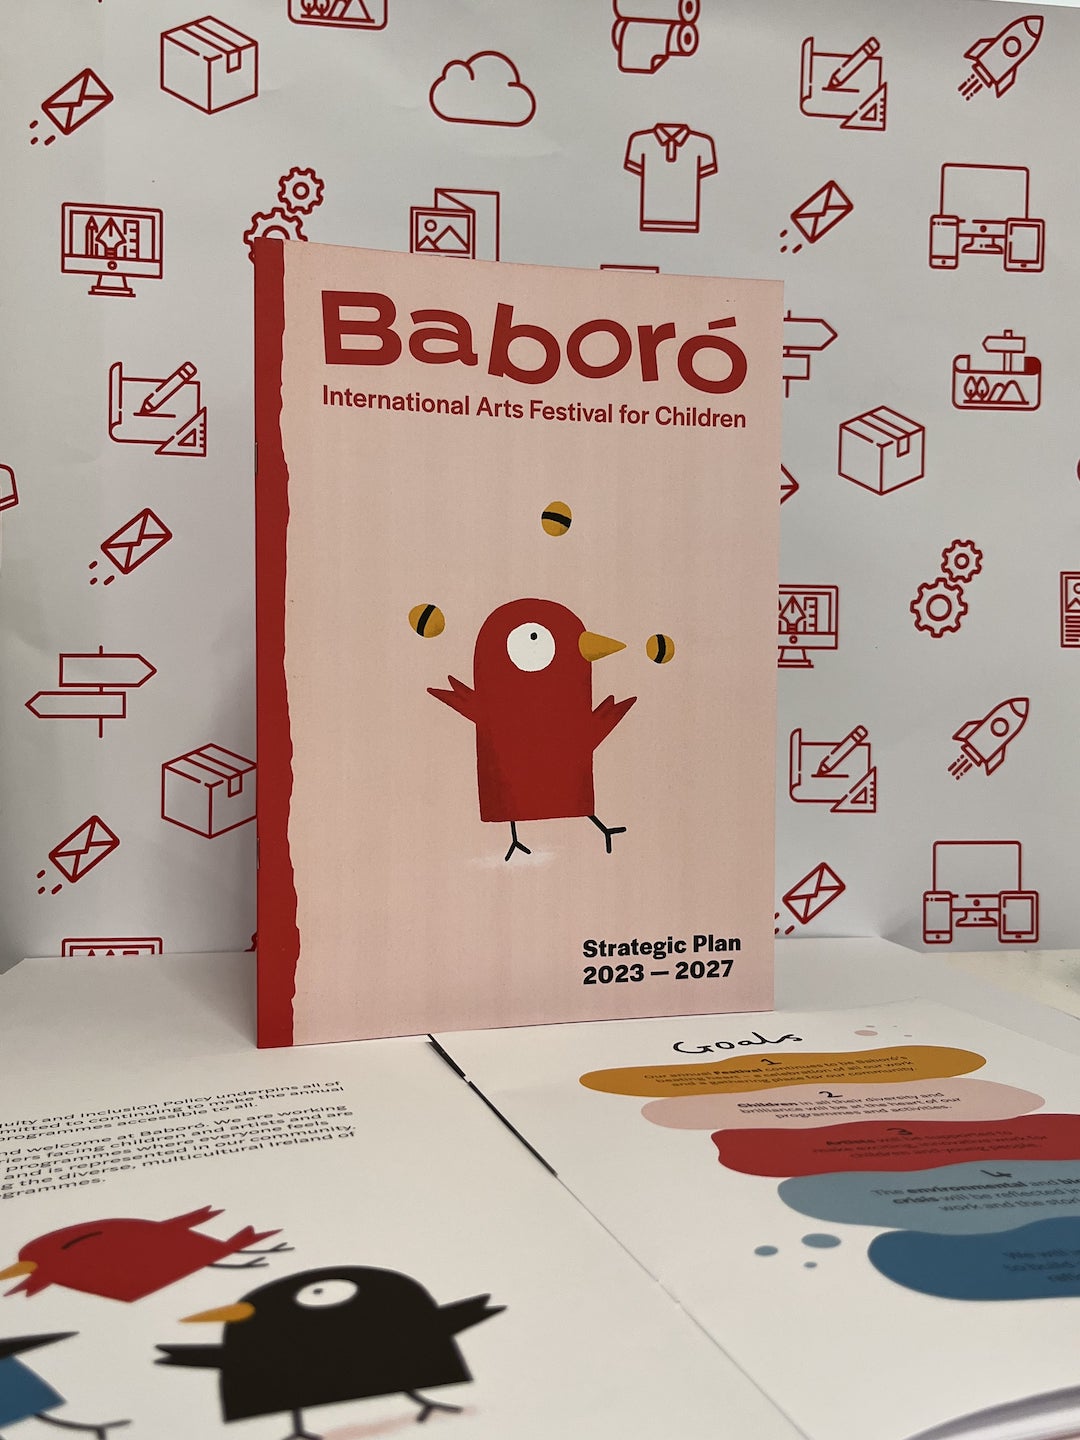 Baboro booklet saddle stiched